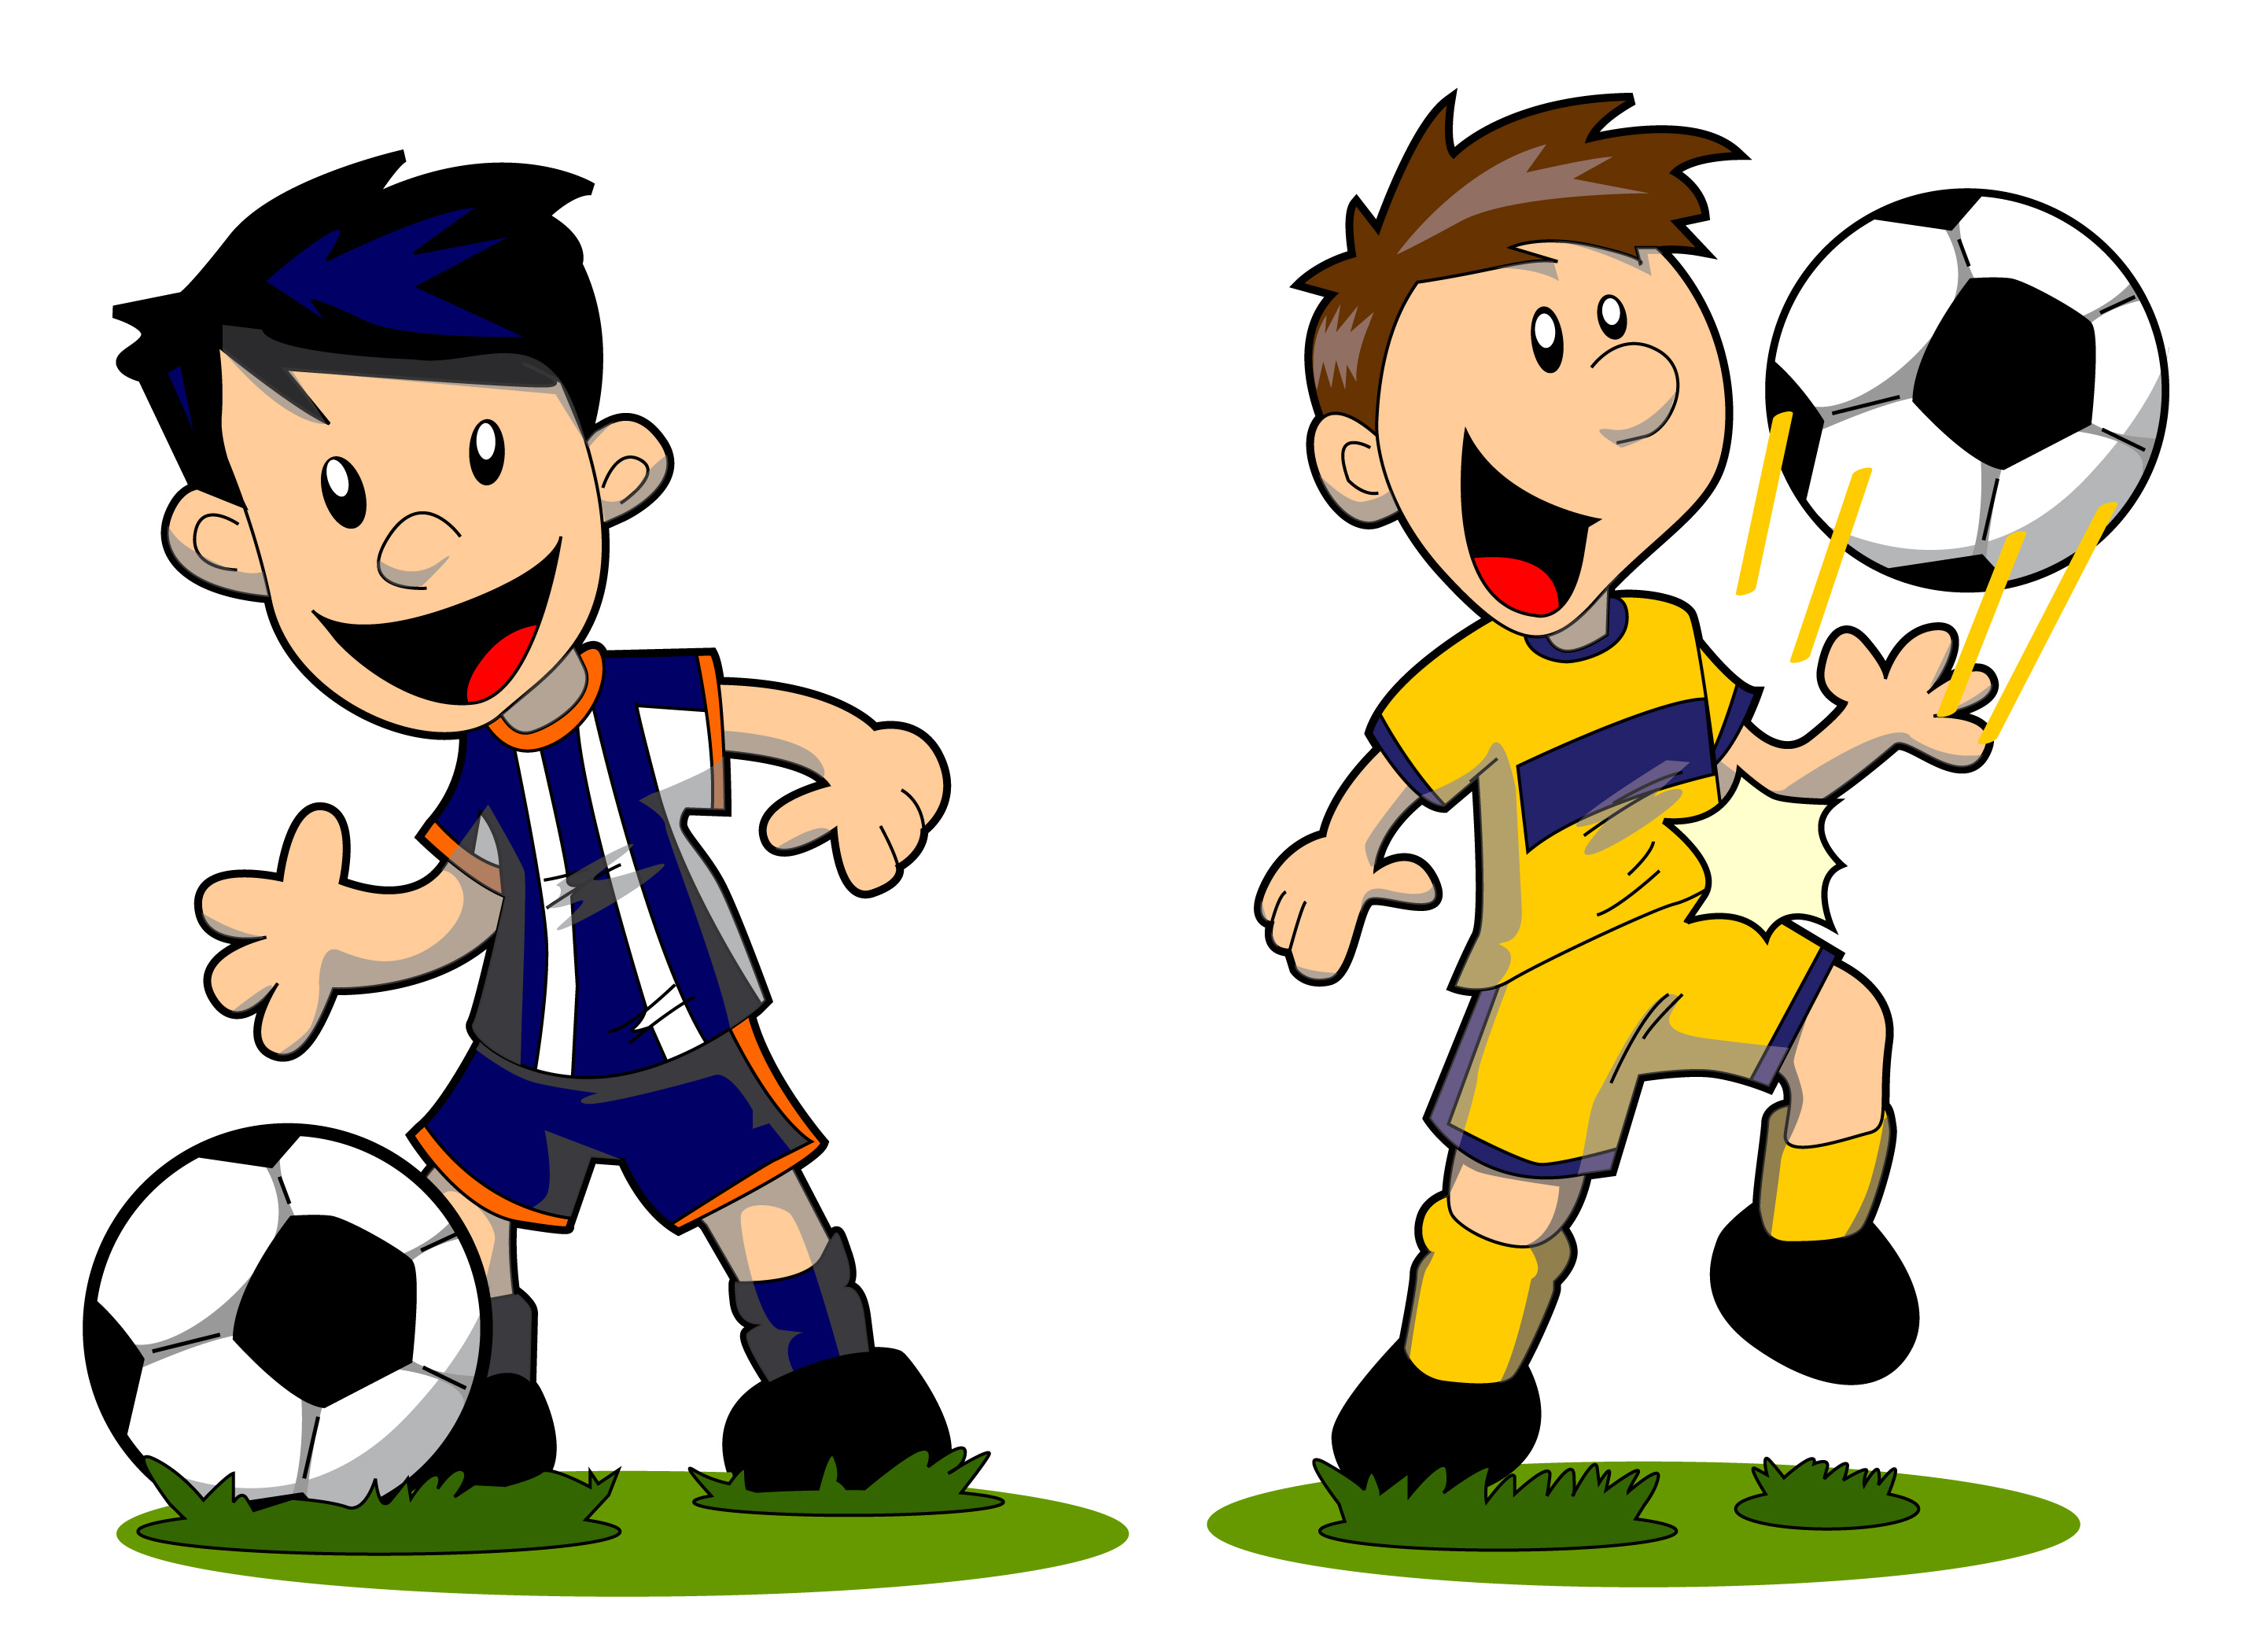 Soccer Player Vector - Cliparts.co